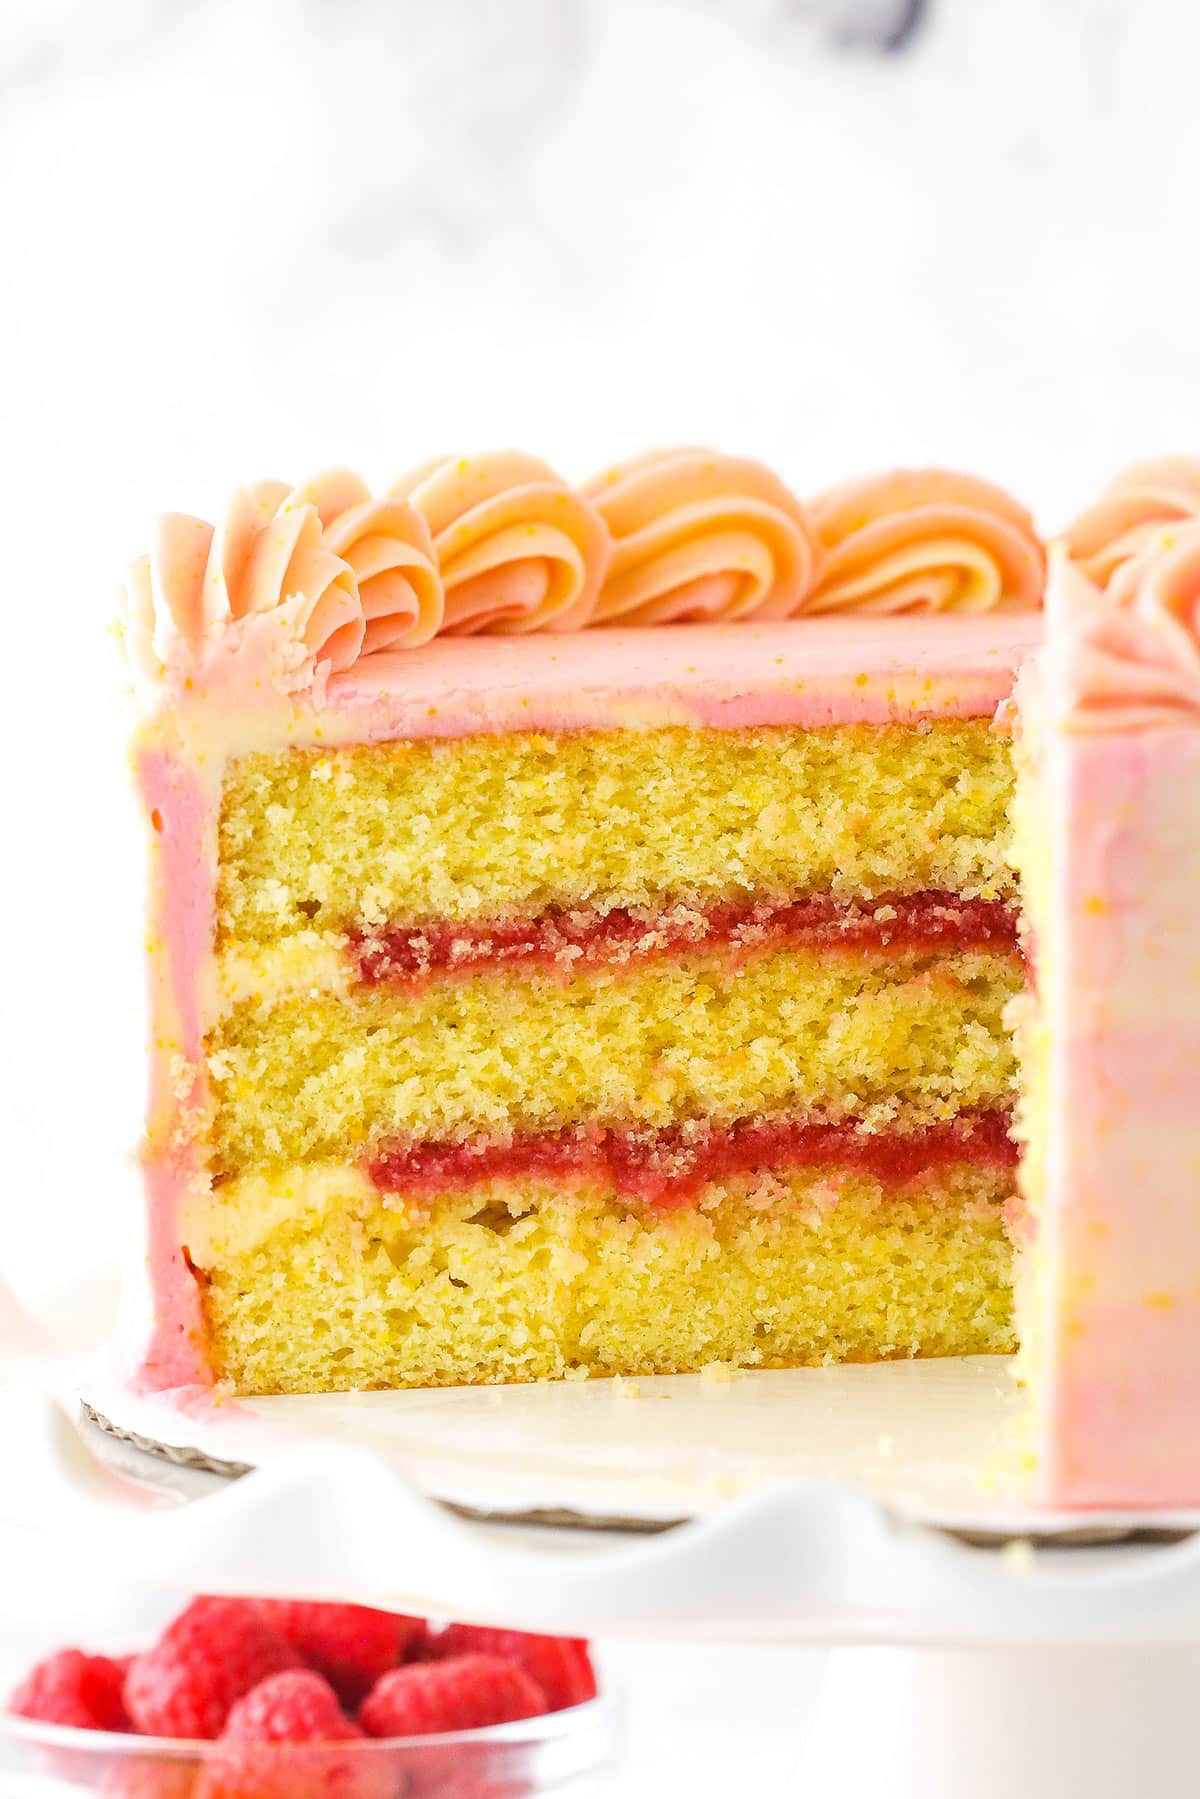 Raspberry orange layer cake on a cake stand with a slice cut out of it near a bowl of raspberries.